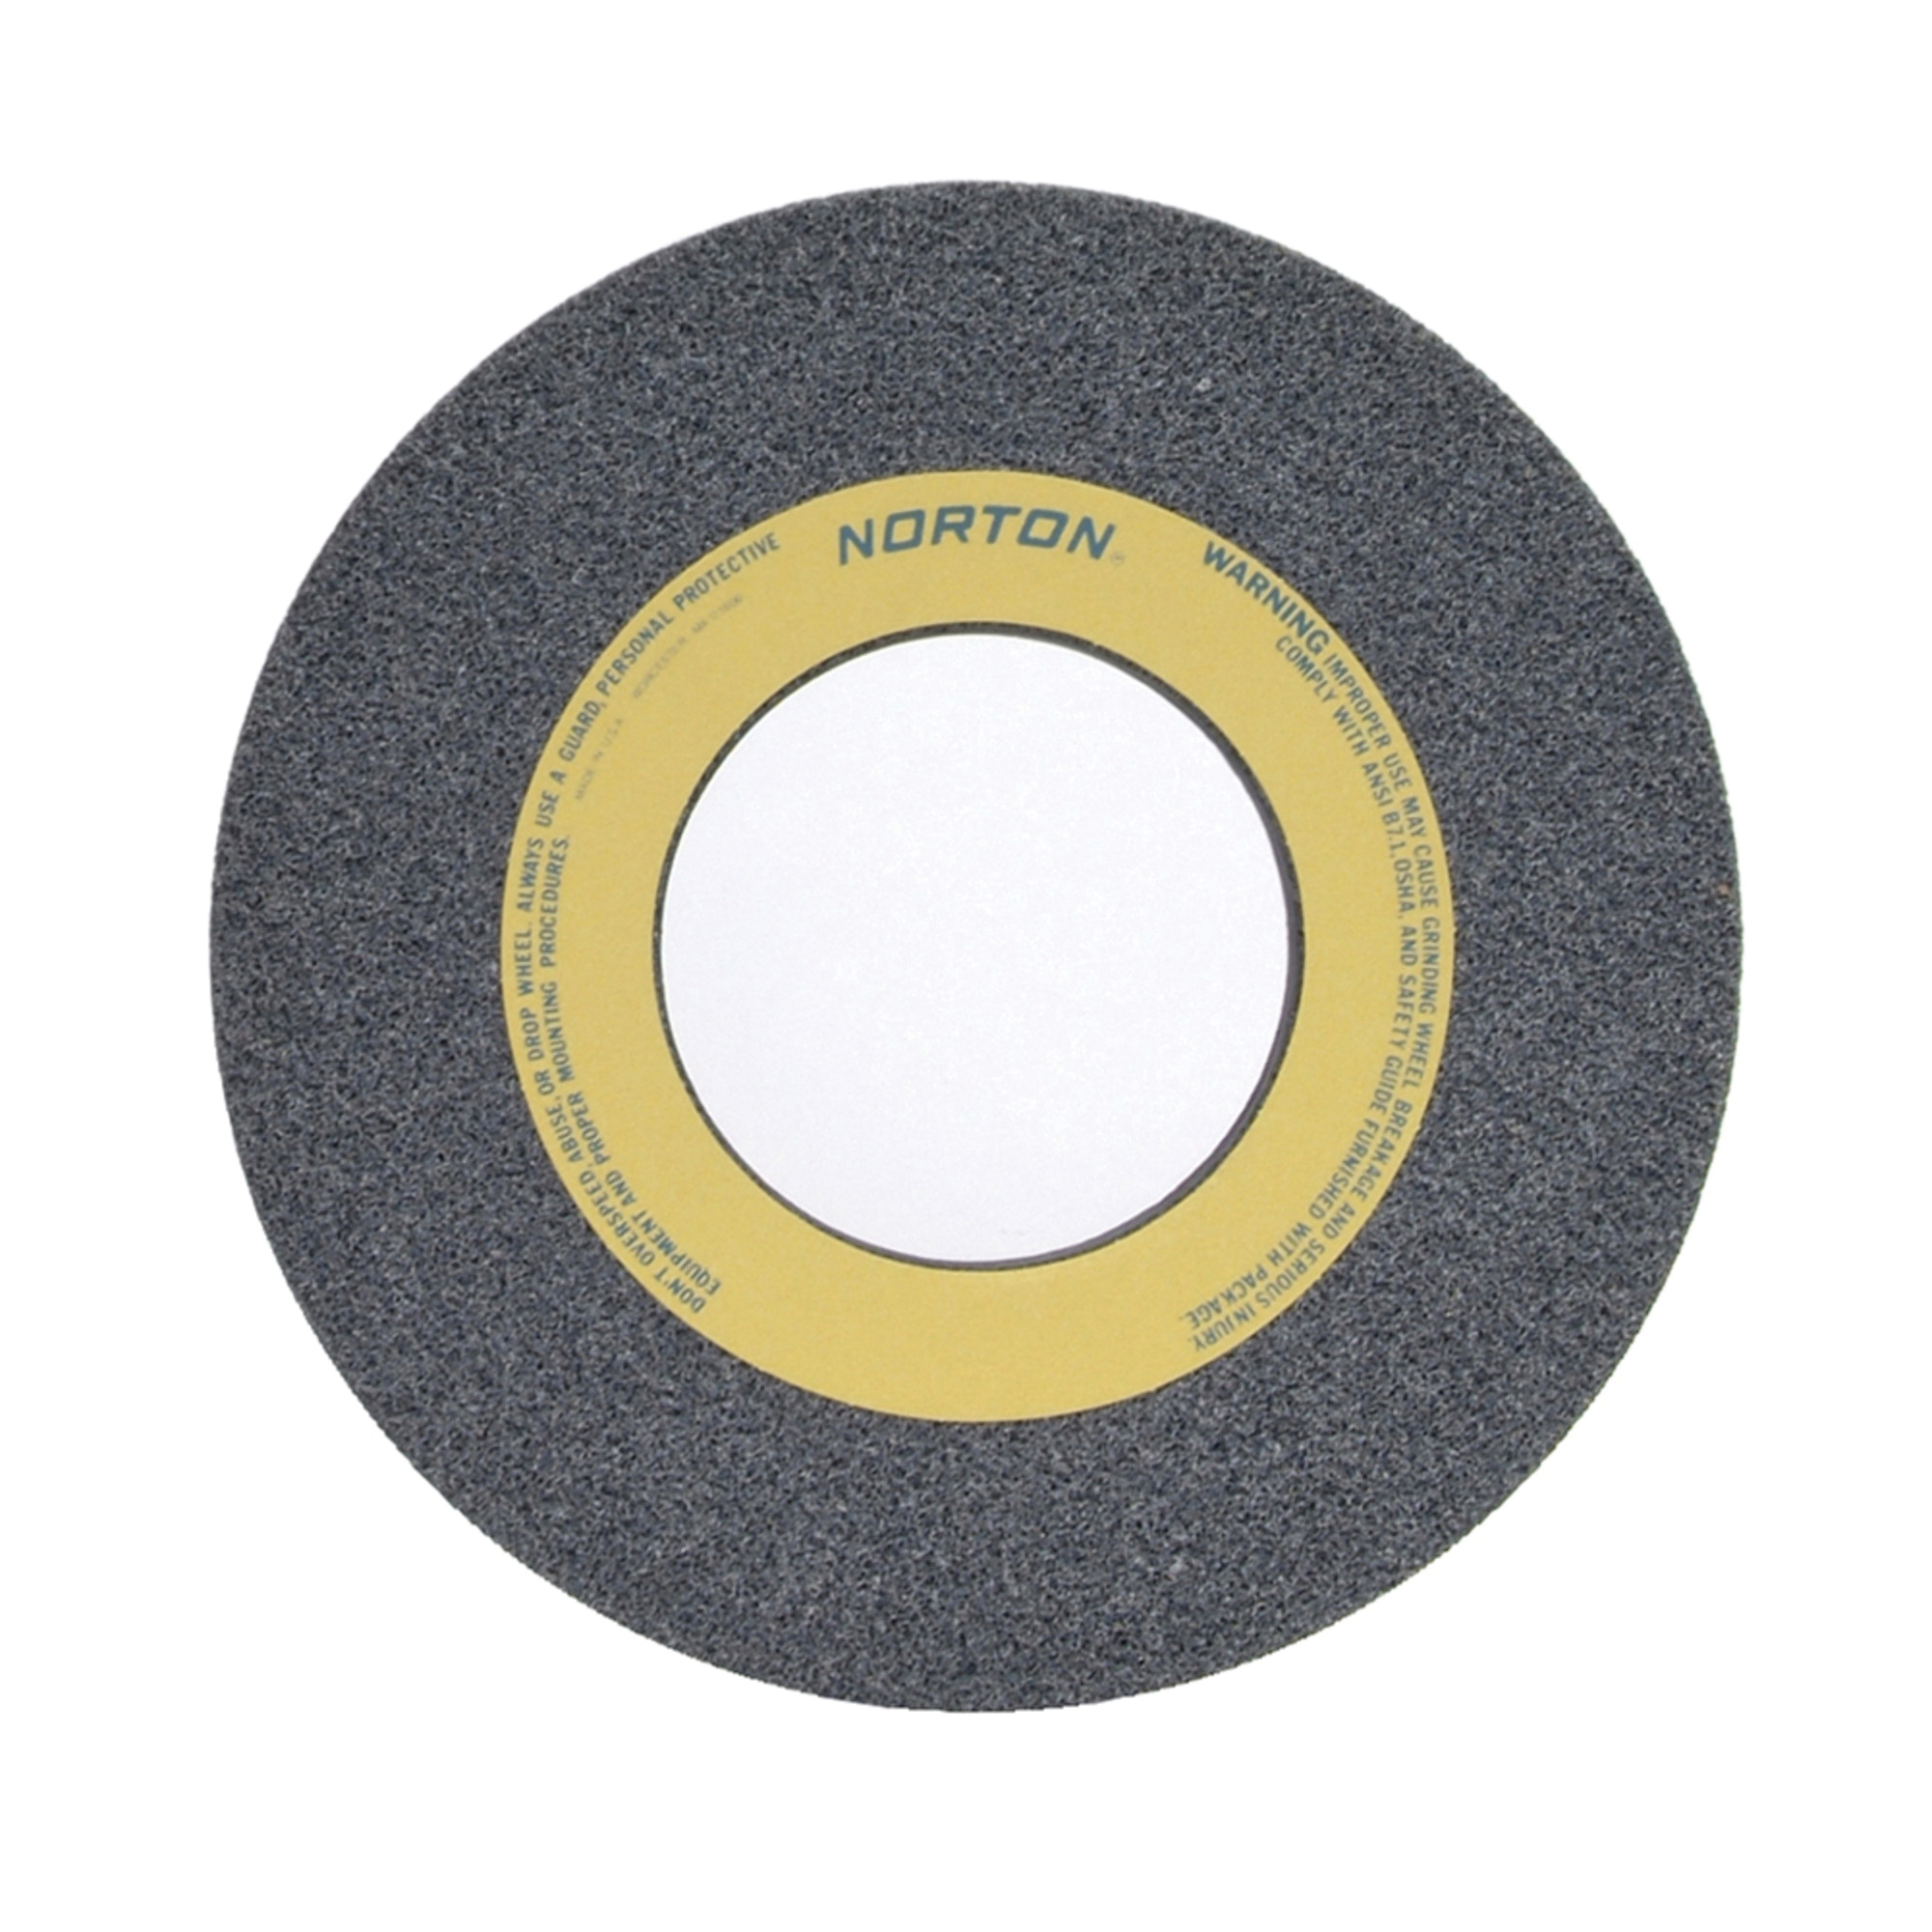 Norton® 66253364335 32A Straight Toolroom Wheel, 14 in Dia x 1-1/2 in THK, 5 in Center Hole, 46 Grit, Aluminum Oxide Abrasive